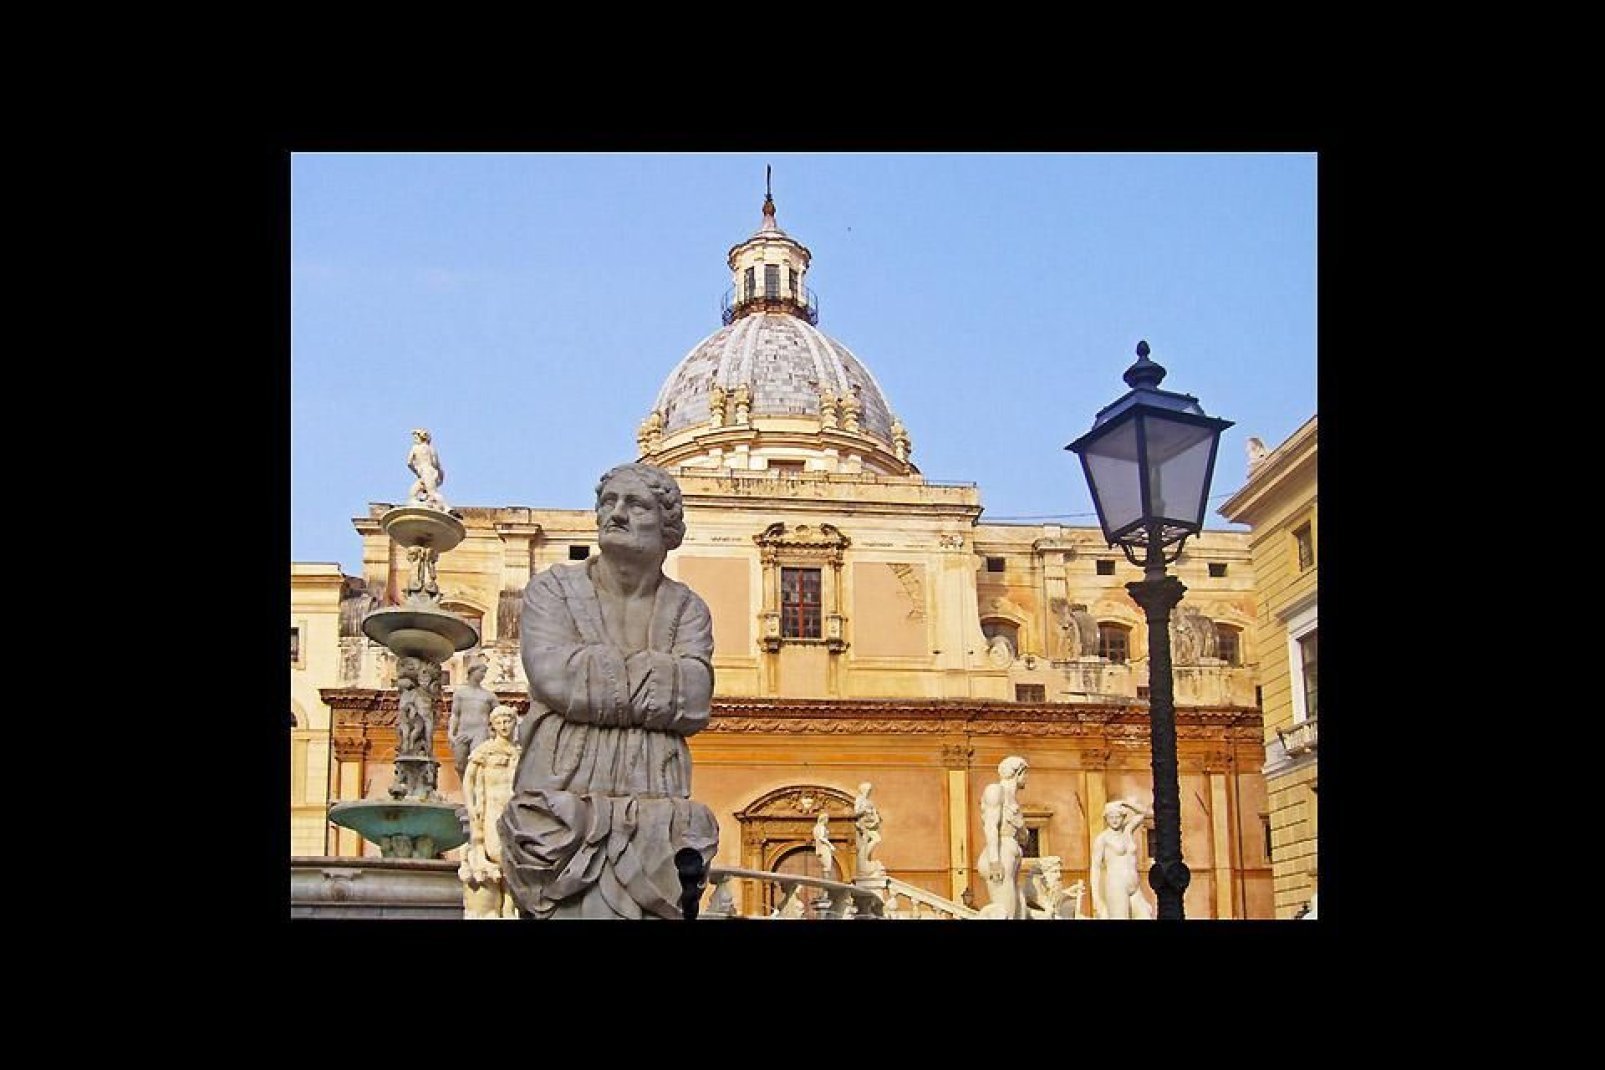 The Church of Santa Caterina, created between the 16th and 19th centuries, overlooks the Piazza Pretoria.